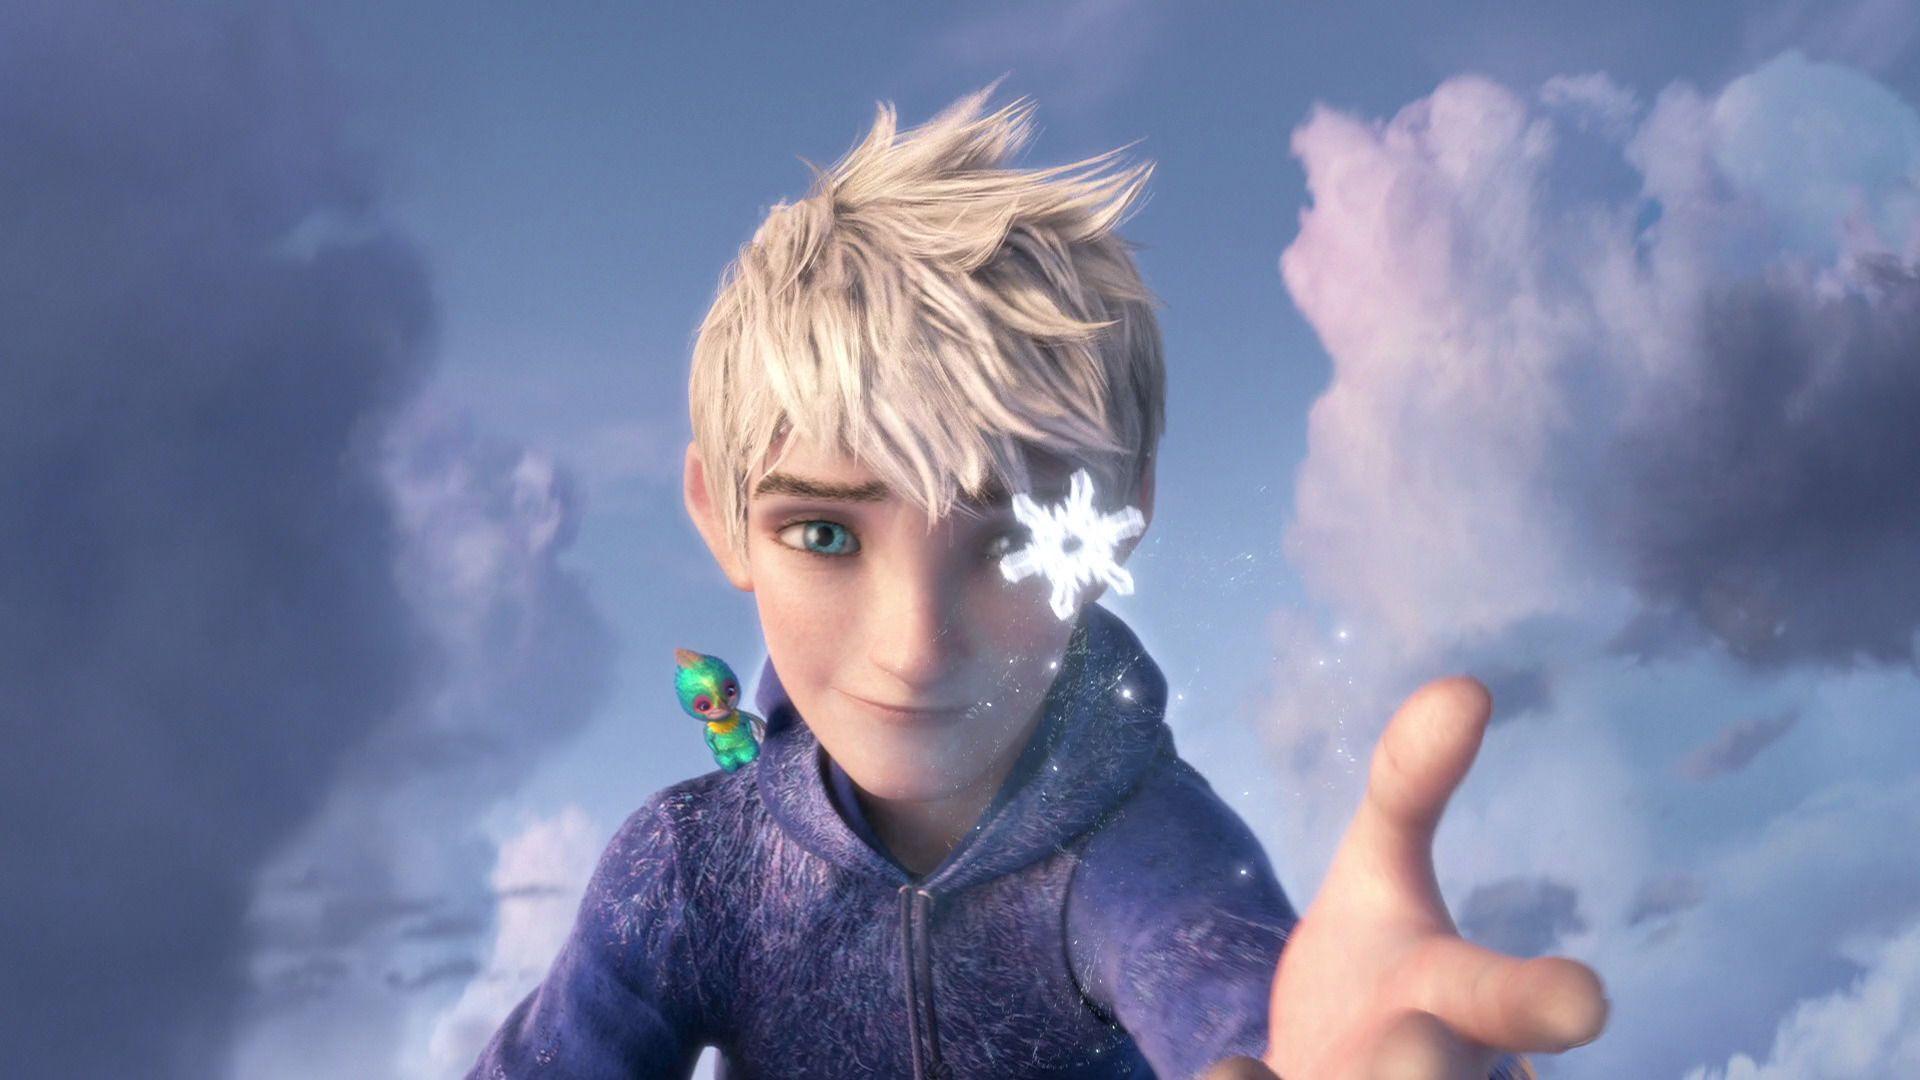 Best image about jack frost HD. Hiccup